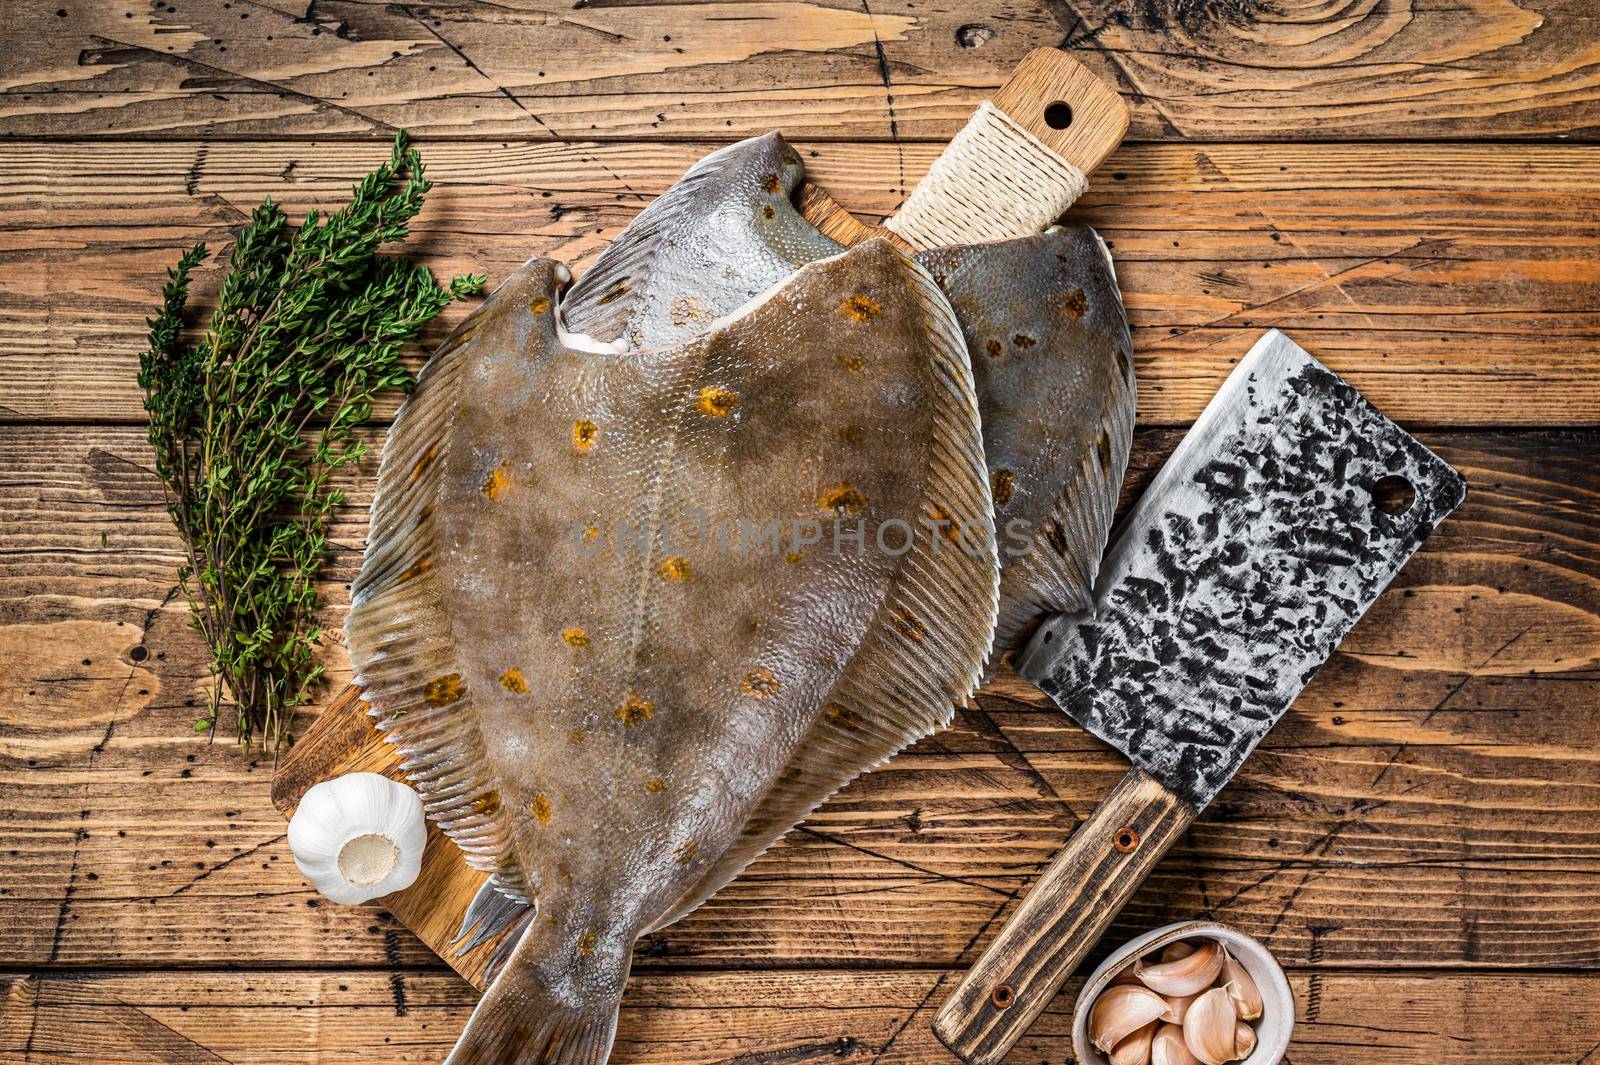 Raw flounder flatfish on butcher board with cleaver. wooden background. Top view by Composter